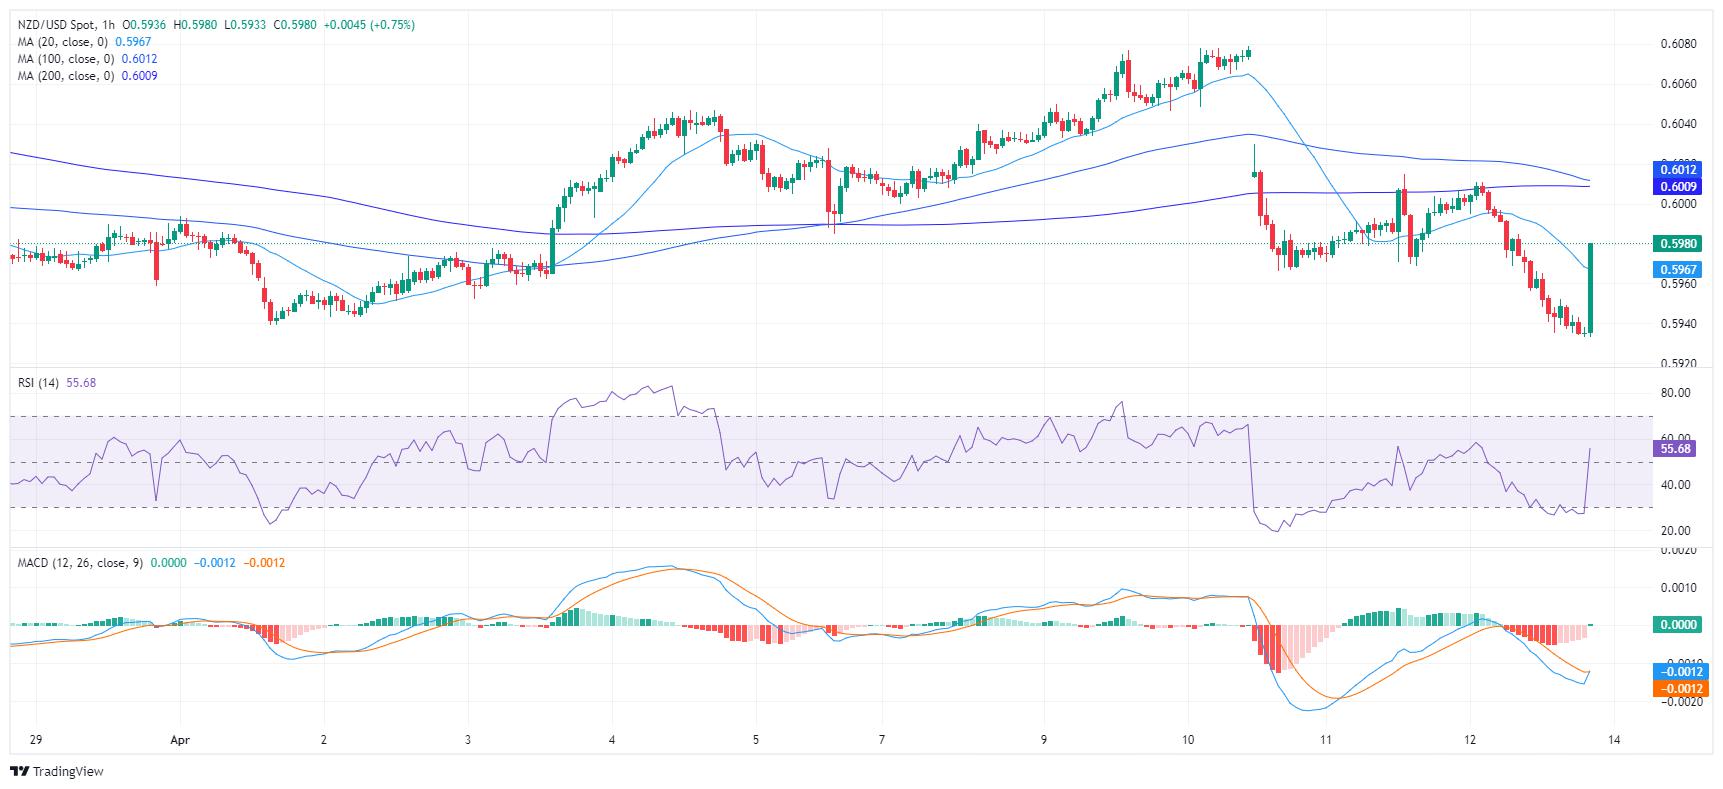 NZD/USD Price Analysis: Bearish dominance persists, signs of short-term bullish recovery detected